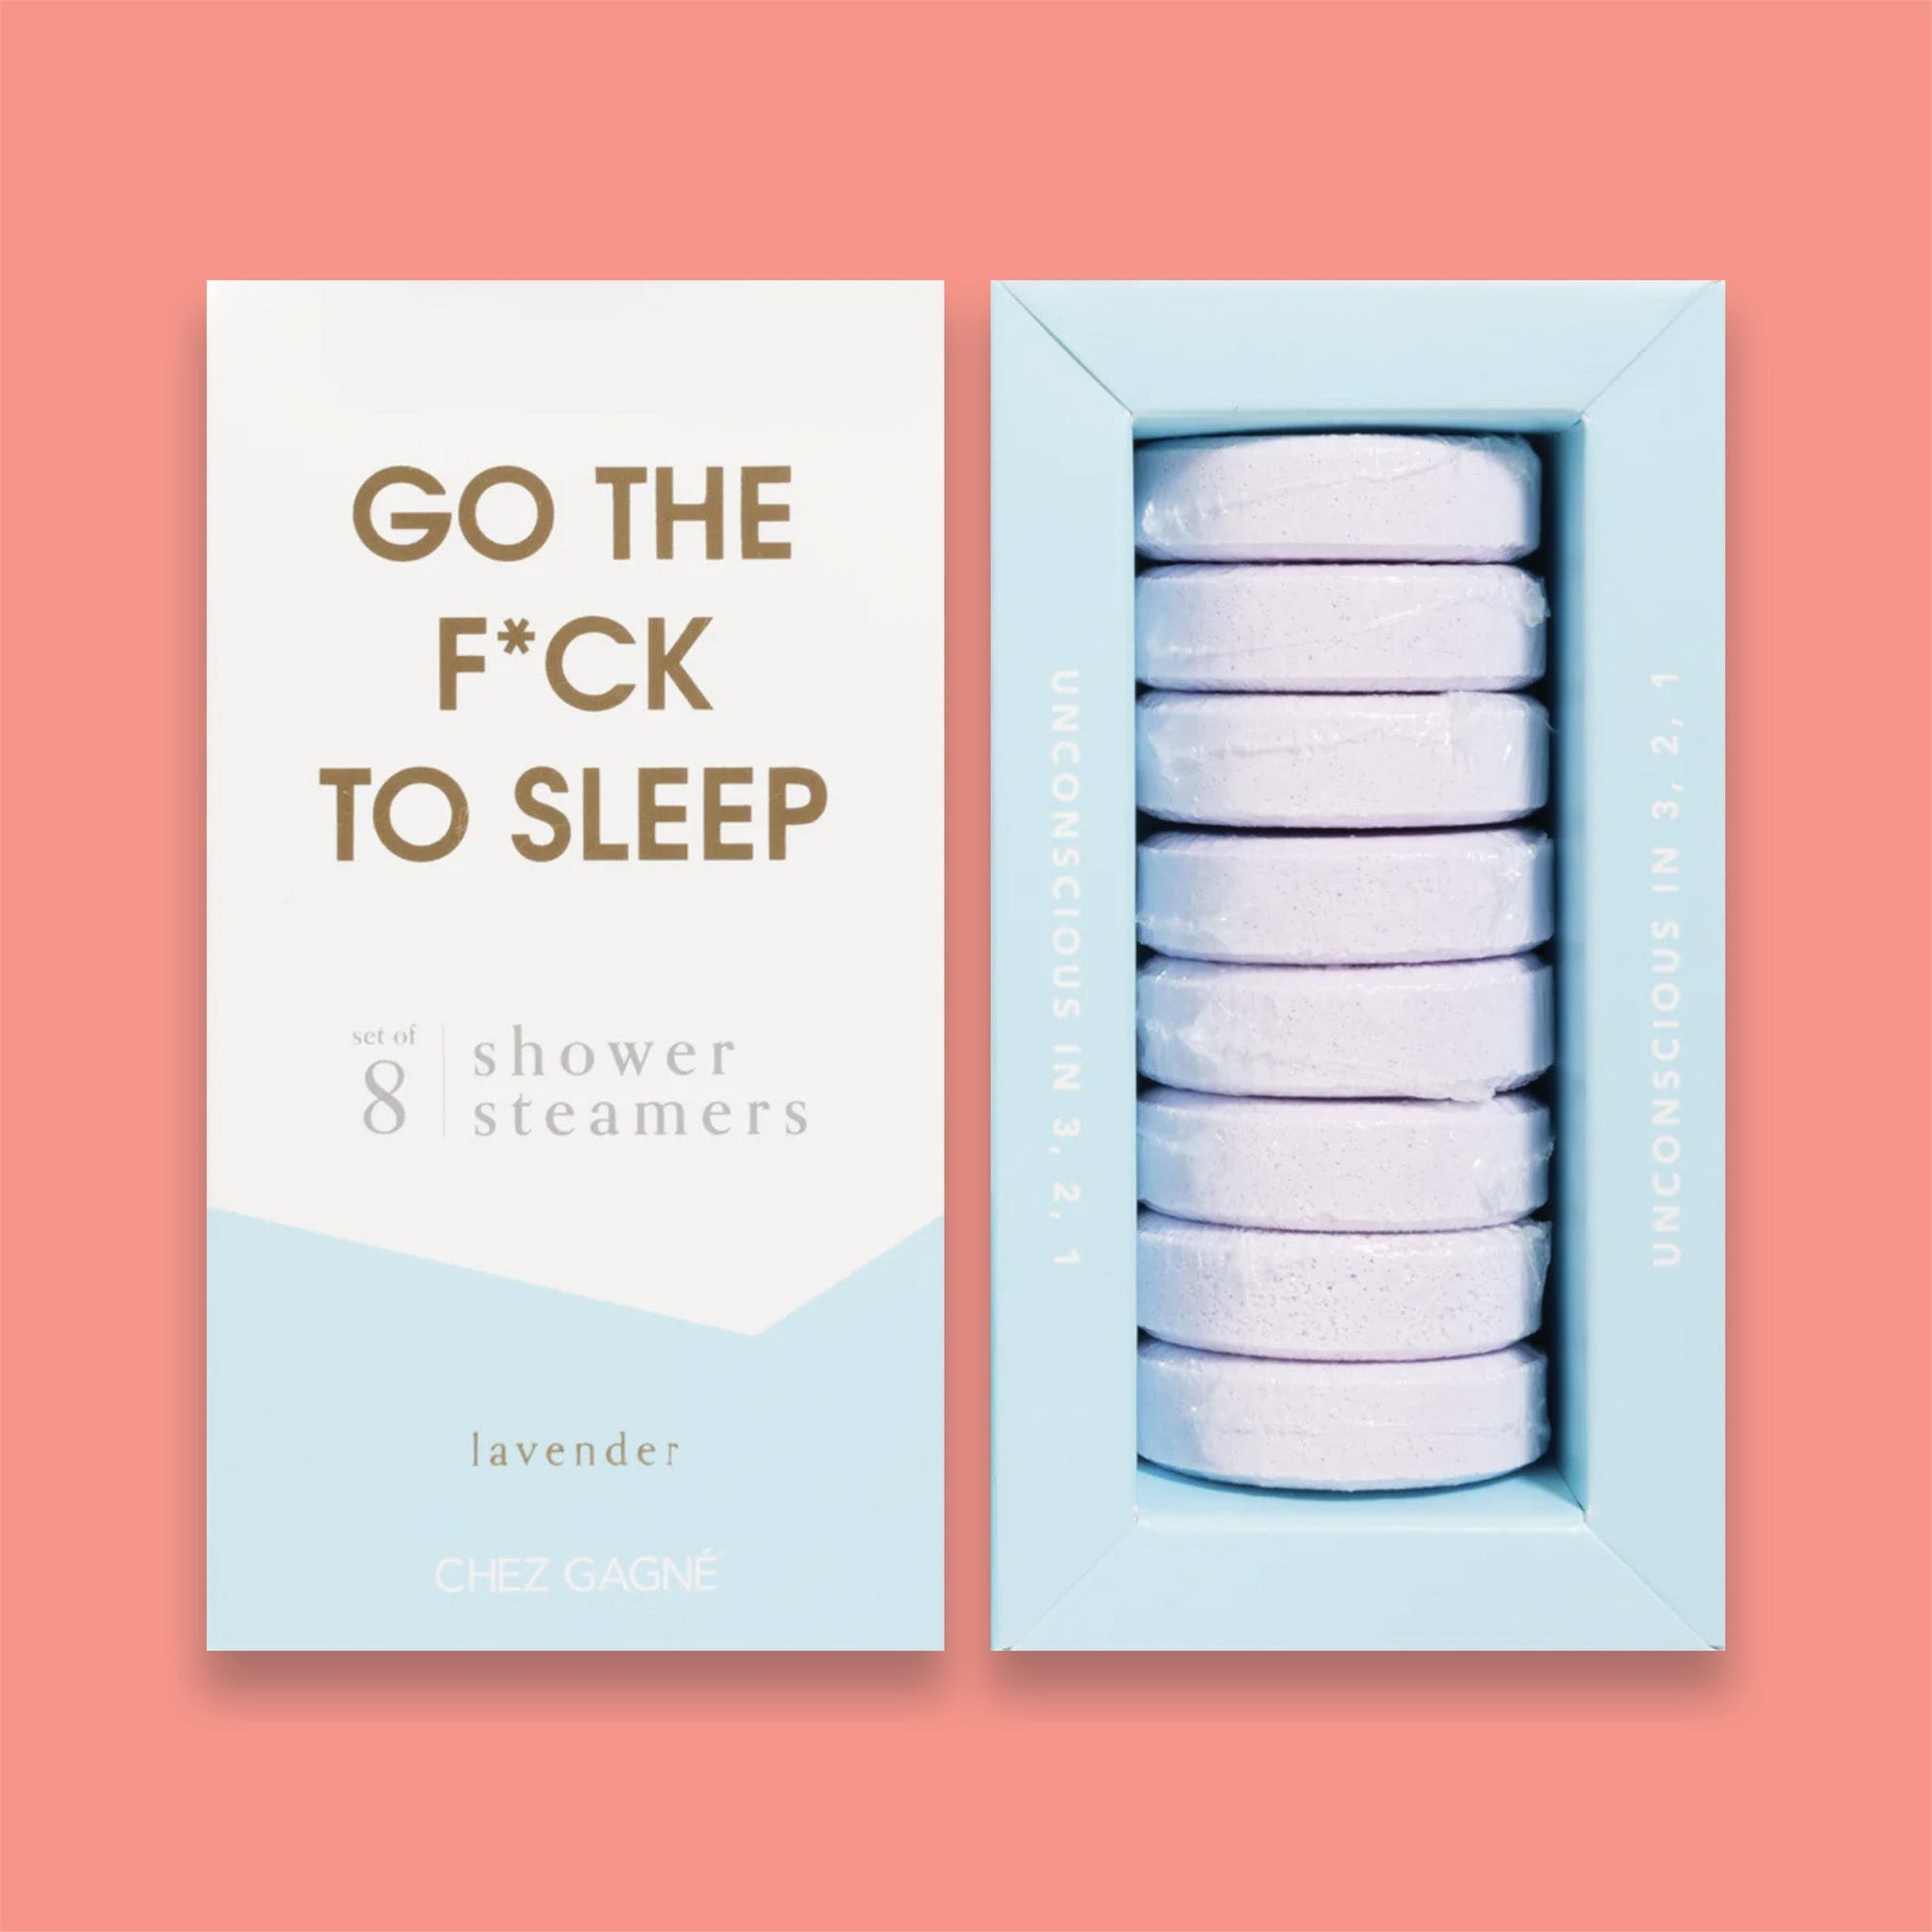 On a light coral background sits two boxes. This picture is a close-up of a white and light blue package that says "GO THE F*CK TO SLEEP" in gold foil, all caps block lettering. Under it says "set of 8" and " shower steamers" in grey, lowercase serif font. At the bottom it says "lavender" in gold foil, lower case serif font. To the right of it is a light blue box with light purple shower steamers in it. 